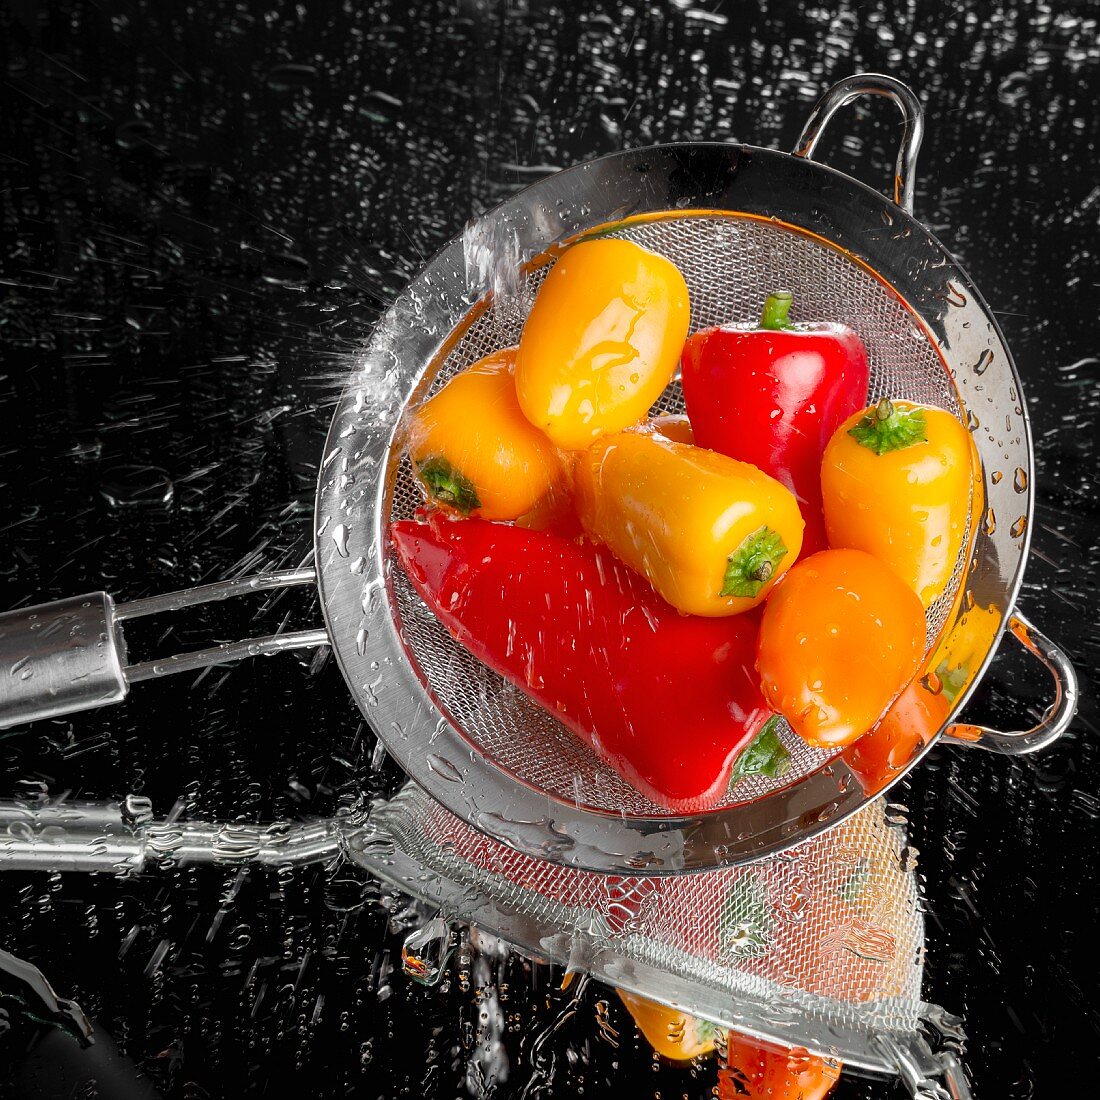 Mini peppers being washed in a sieve